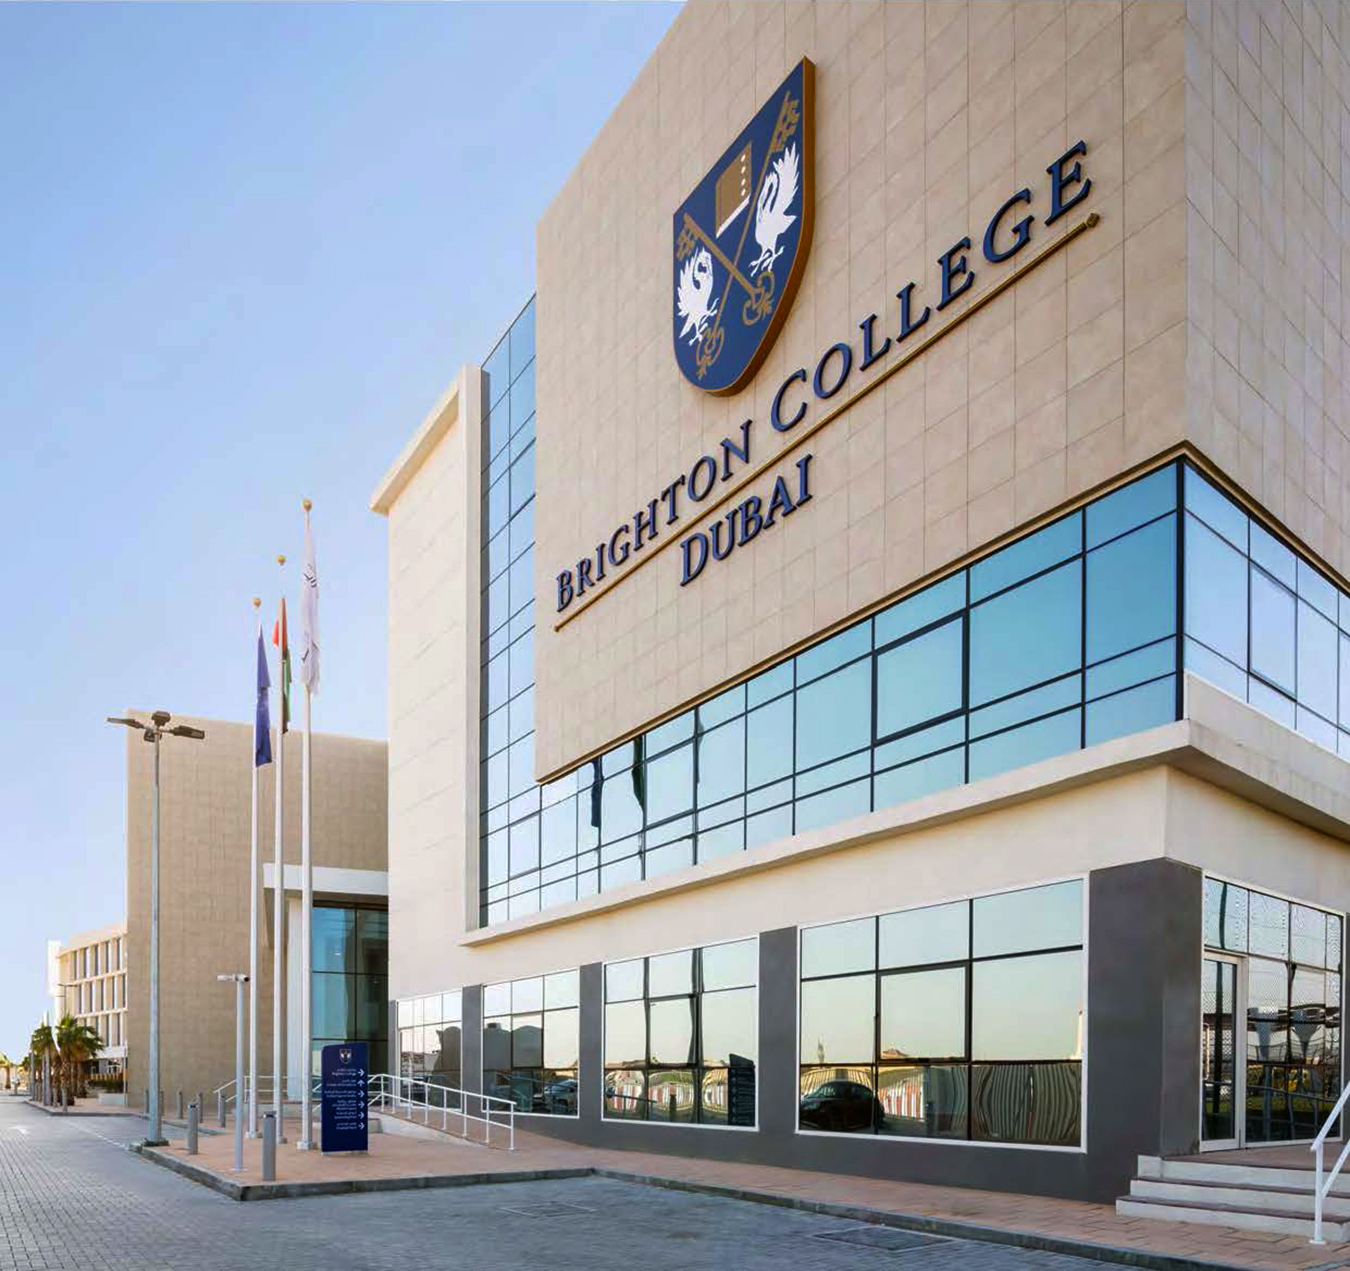 Pictured the Landmark buildings of Brighton College Dubai as part of the Top Schools Award for Best New School in the United Arab Emirates 2023 - 2024